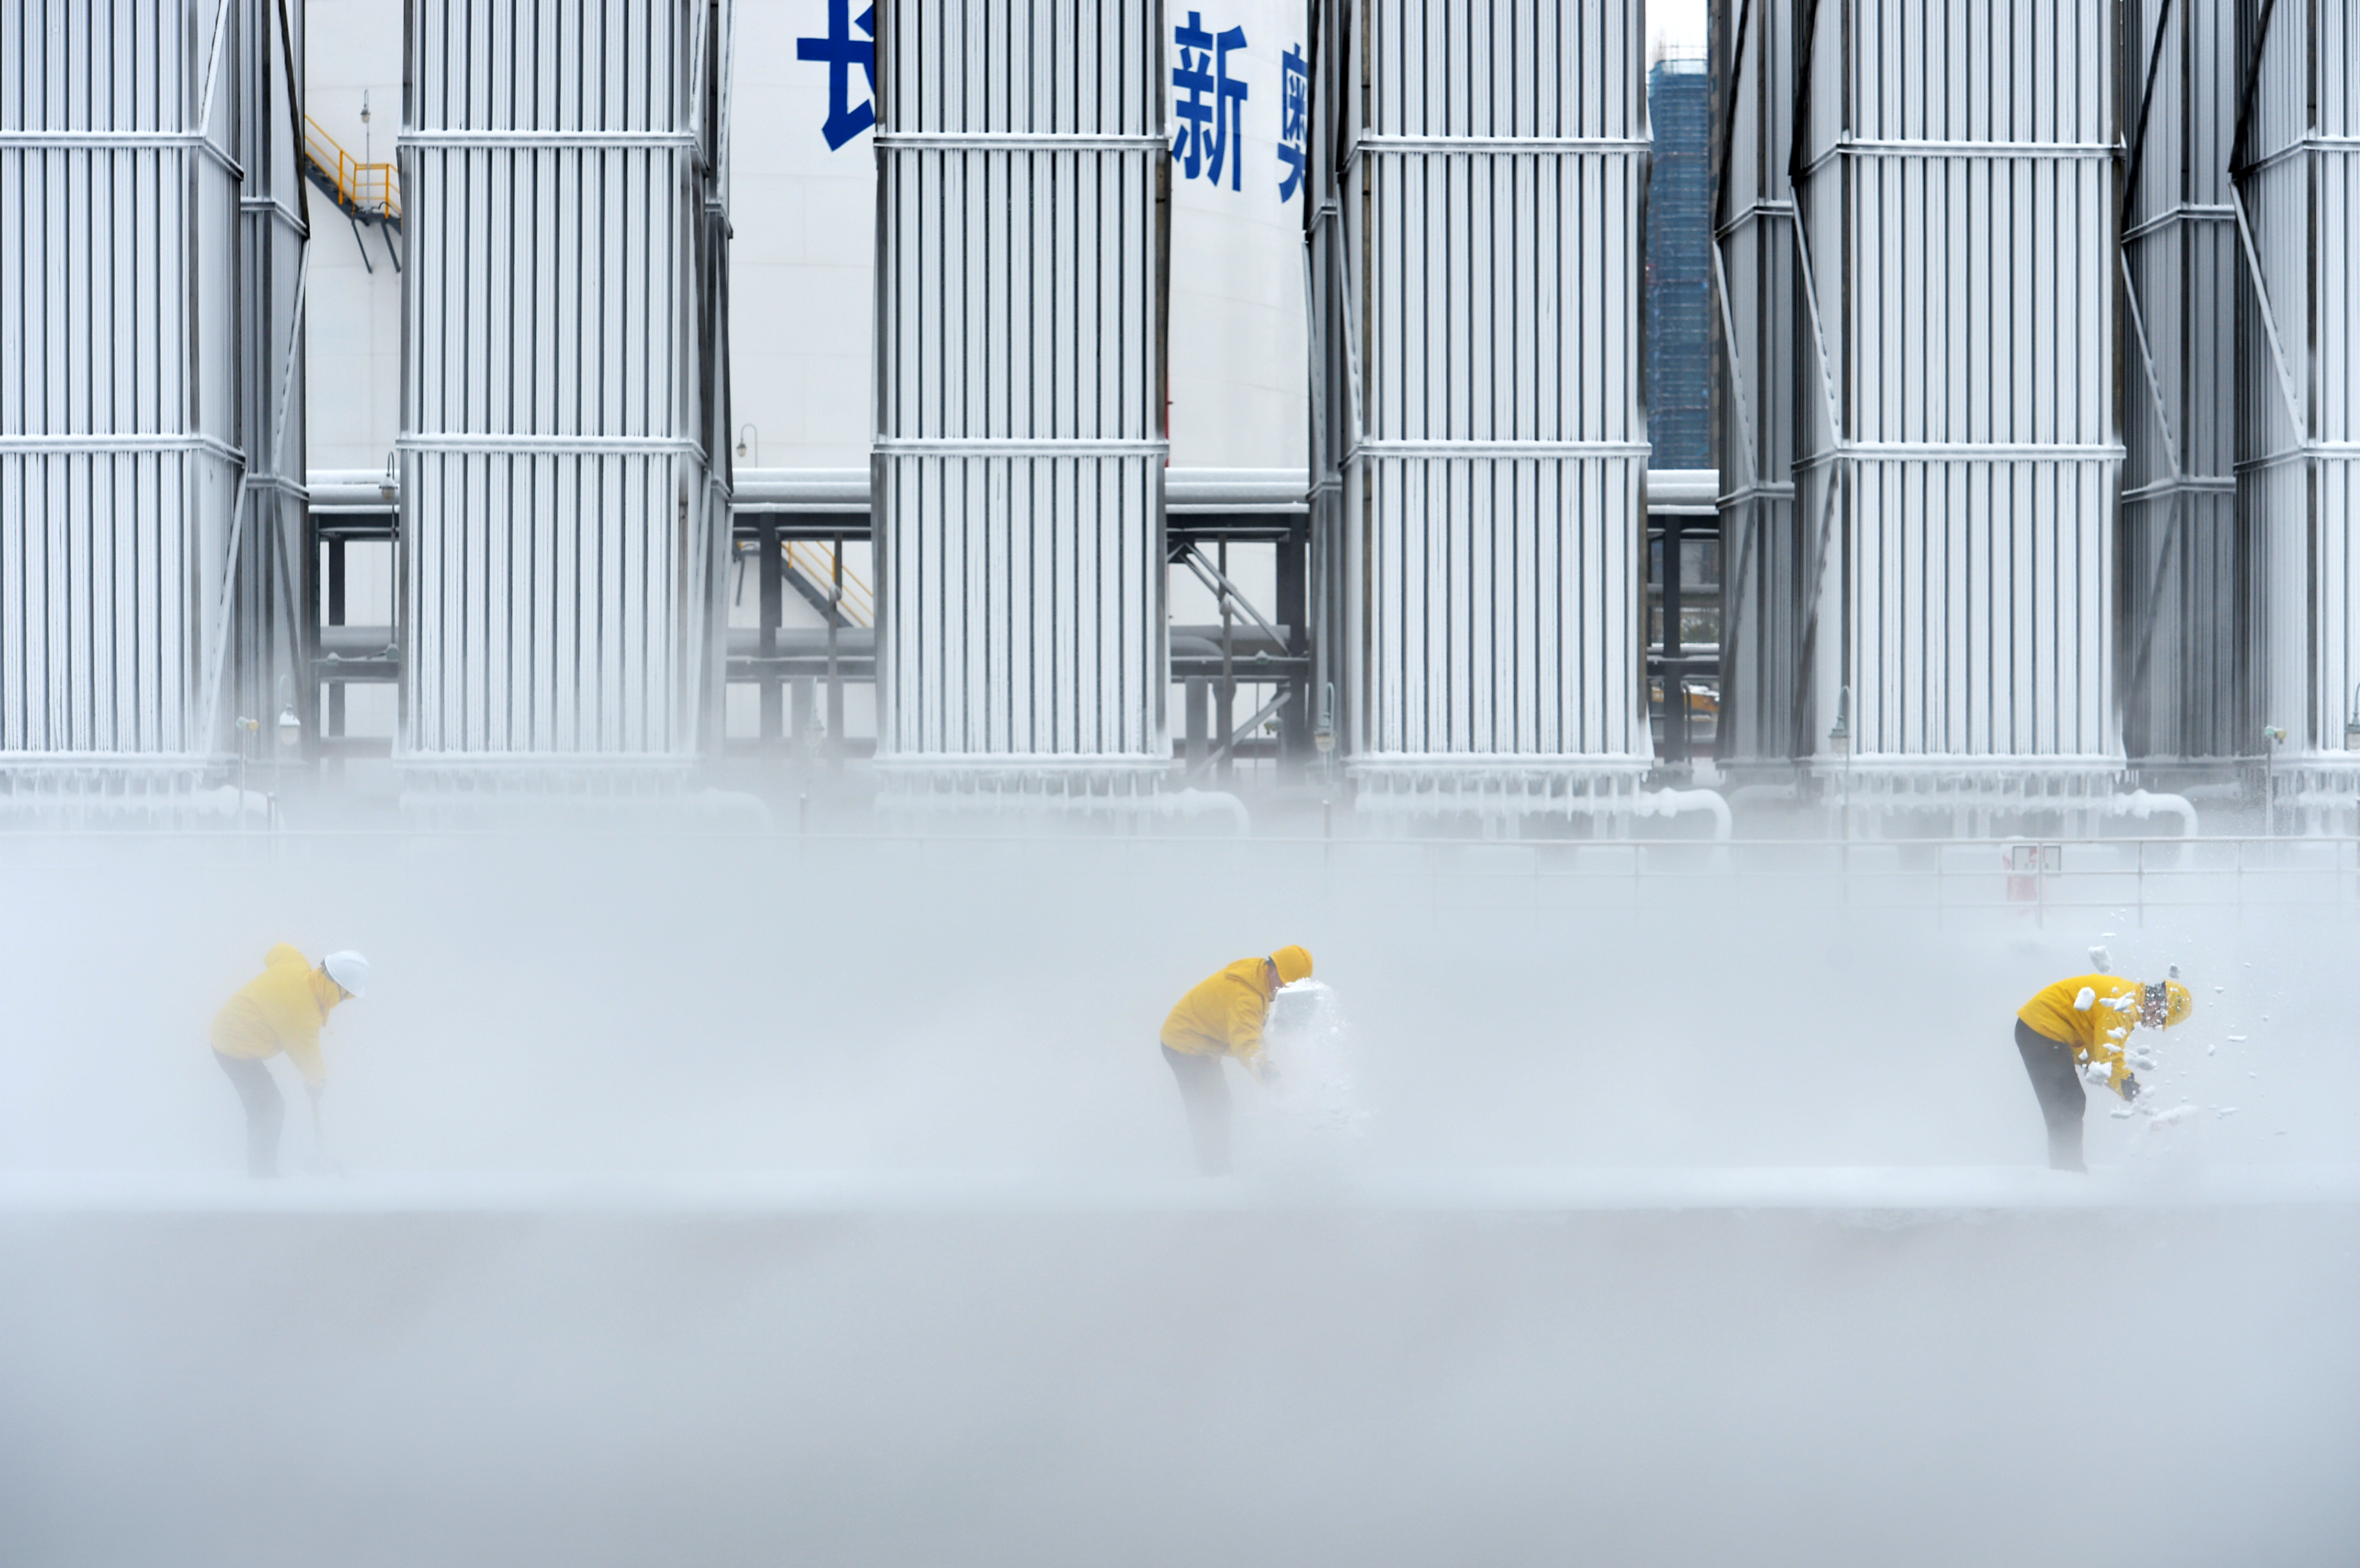 Workers remove snow at a liquefied natural gas (LNG) facility of ENN Group in Changsha